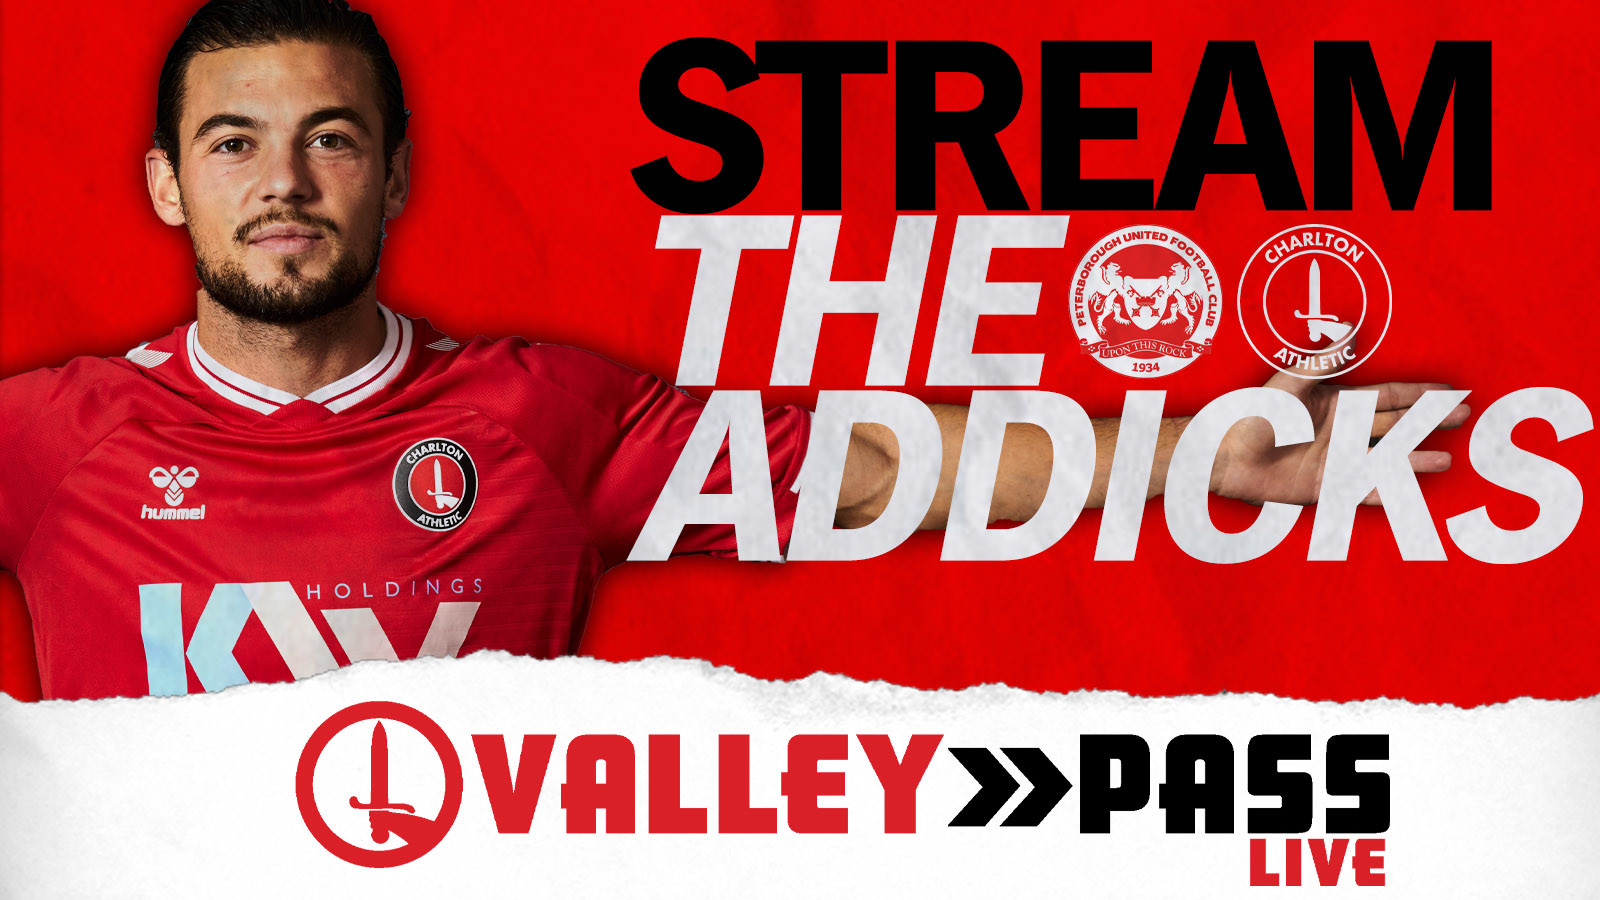 Get your live streaming video pass for Peterborough United v Charlton Charlton Athletic Football Club